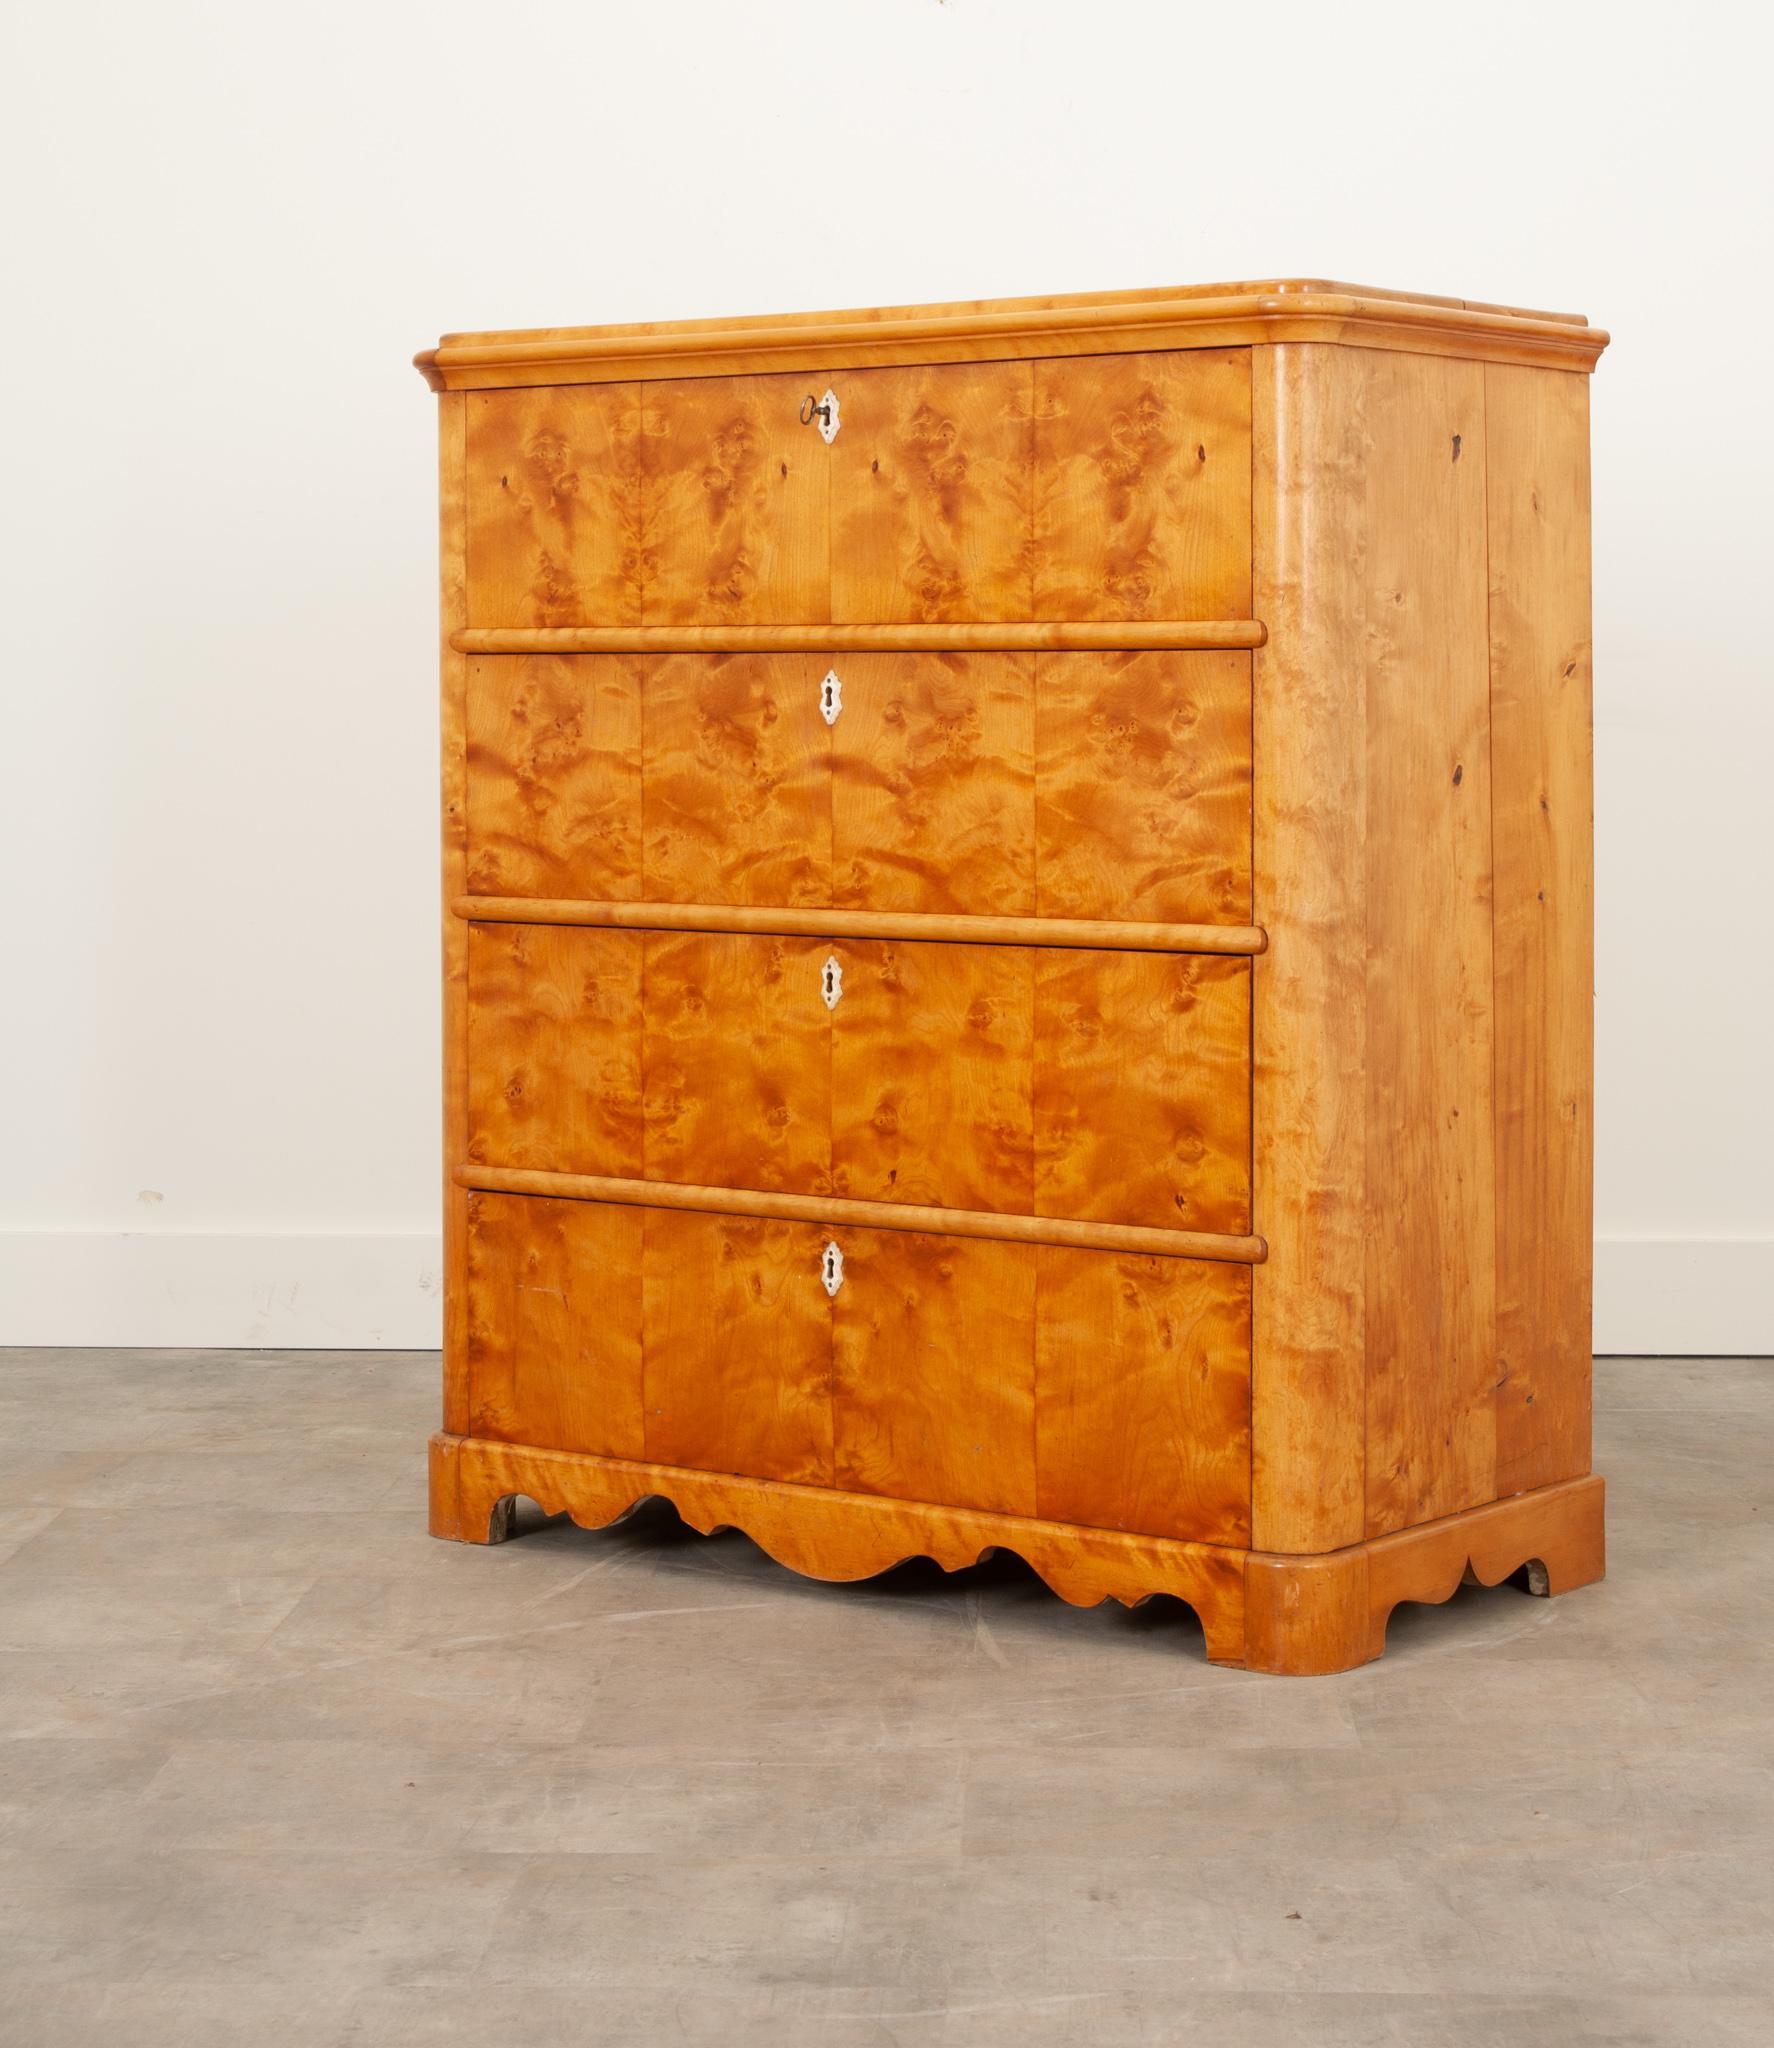 This stunning chest of drawers from the 1800’s Sweden is a showstopper in any space. Crafted from gorgeous bookmatched satinwood, each drawer front features a detailed escutcheon plate carved from bone. The top drawer houses four smaller drawers